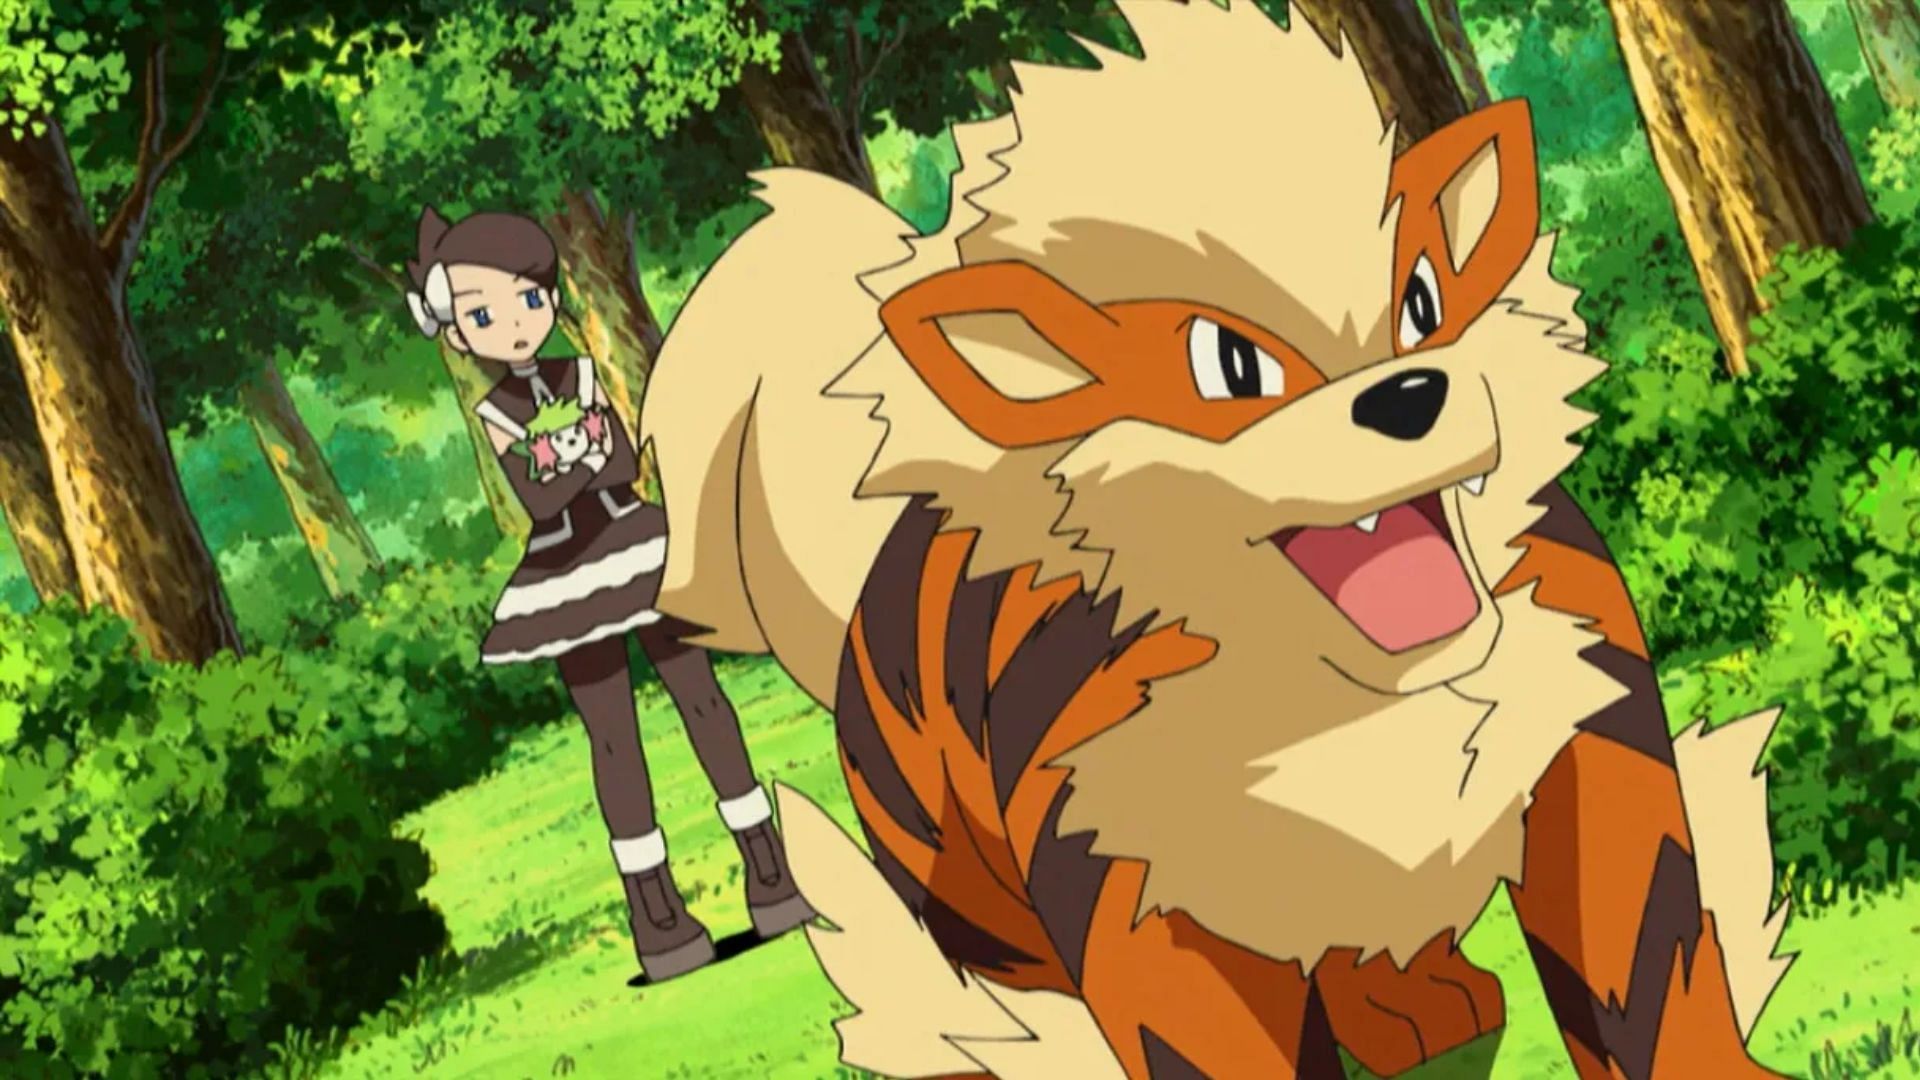 Arcanine as seen in the anime (Image via The Pokemon Company)